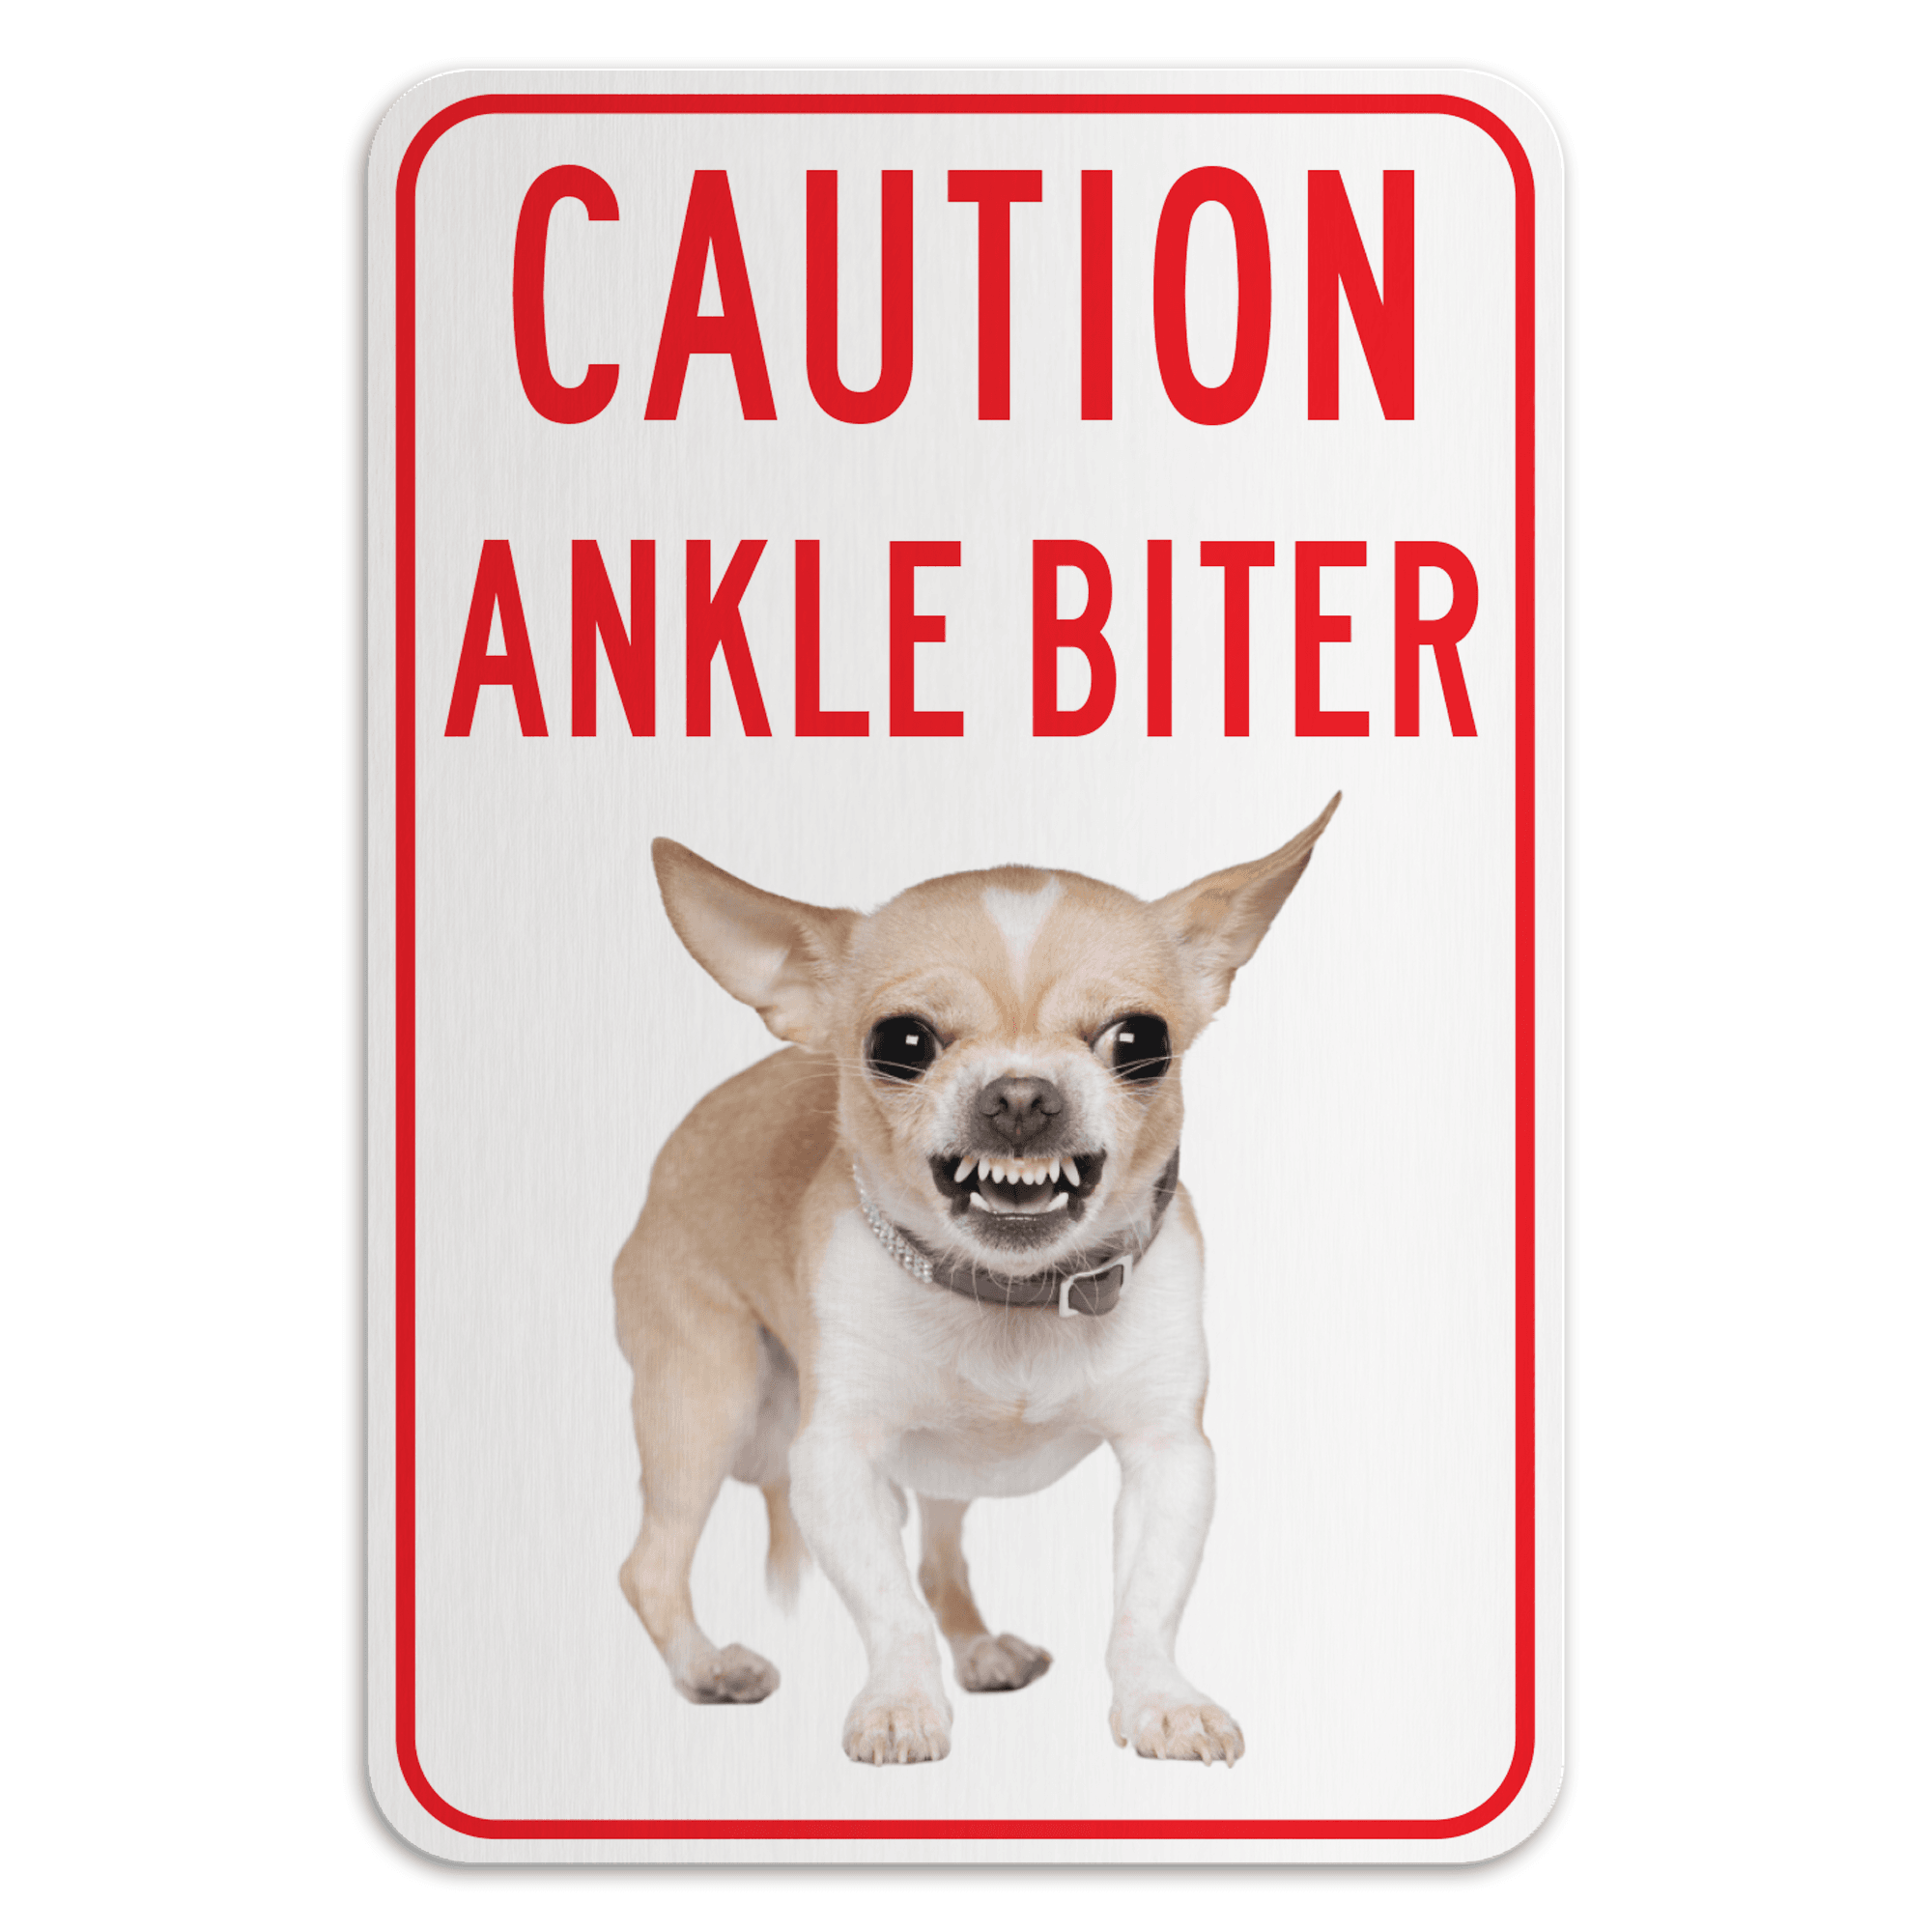 CAUTION ANKLE BITER - American Sign Company